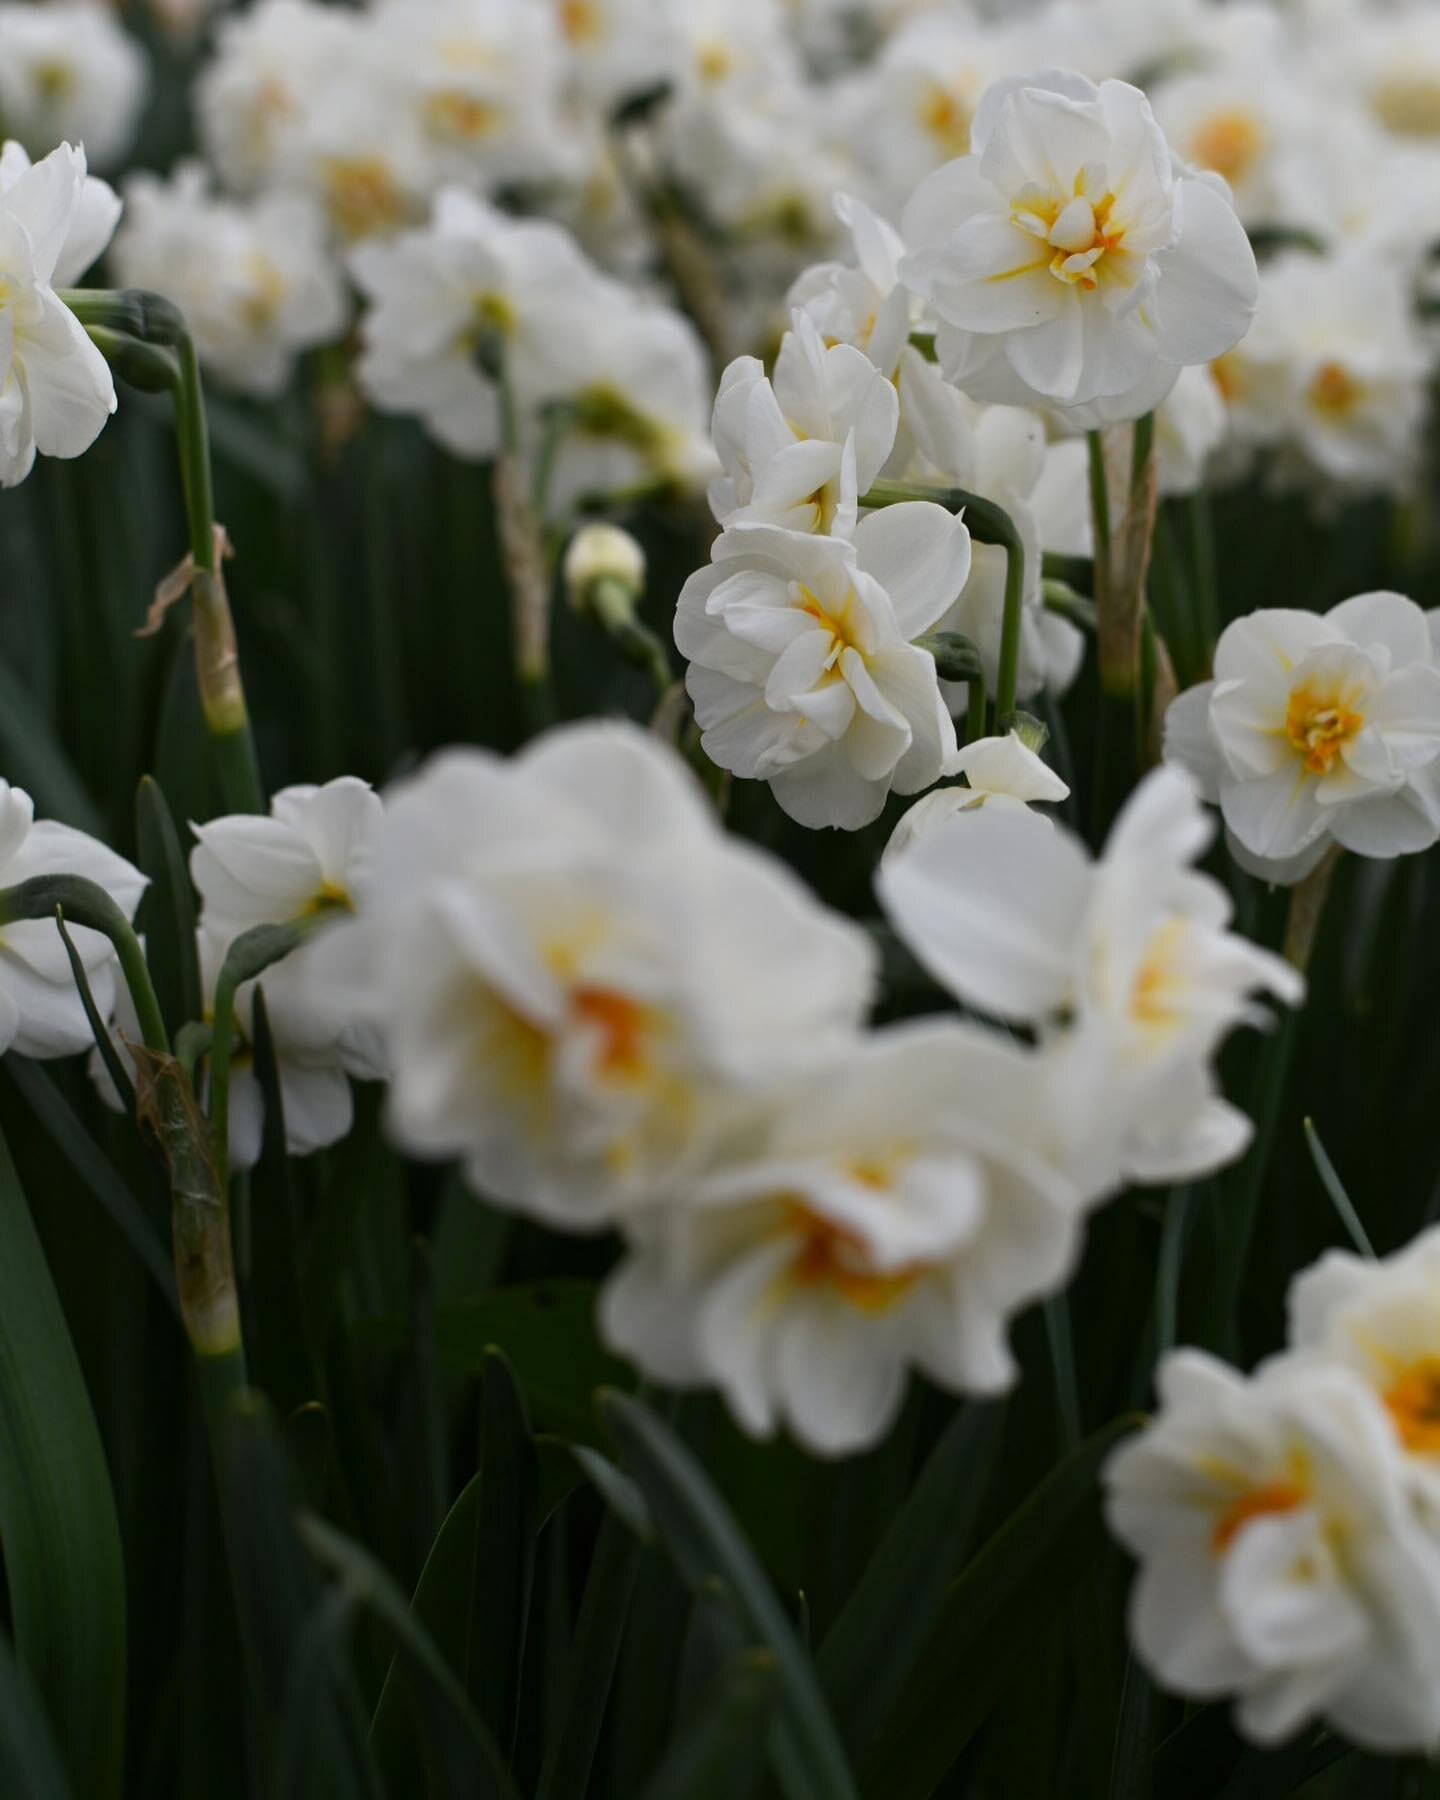 The first big crop of the year will be my fancy daffodils. They smell good and they&rsquo;re properly special and I love them. I have a beaaautiful wedding coming up at the end of March which I have some new varieties in the ground for. I&rsquo;m so 